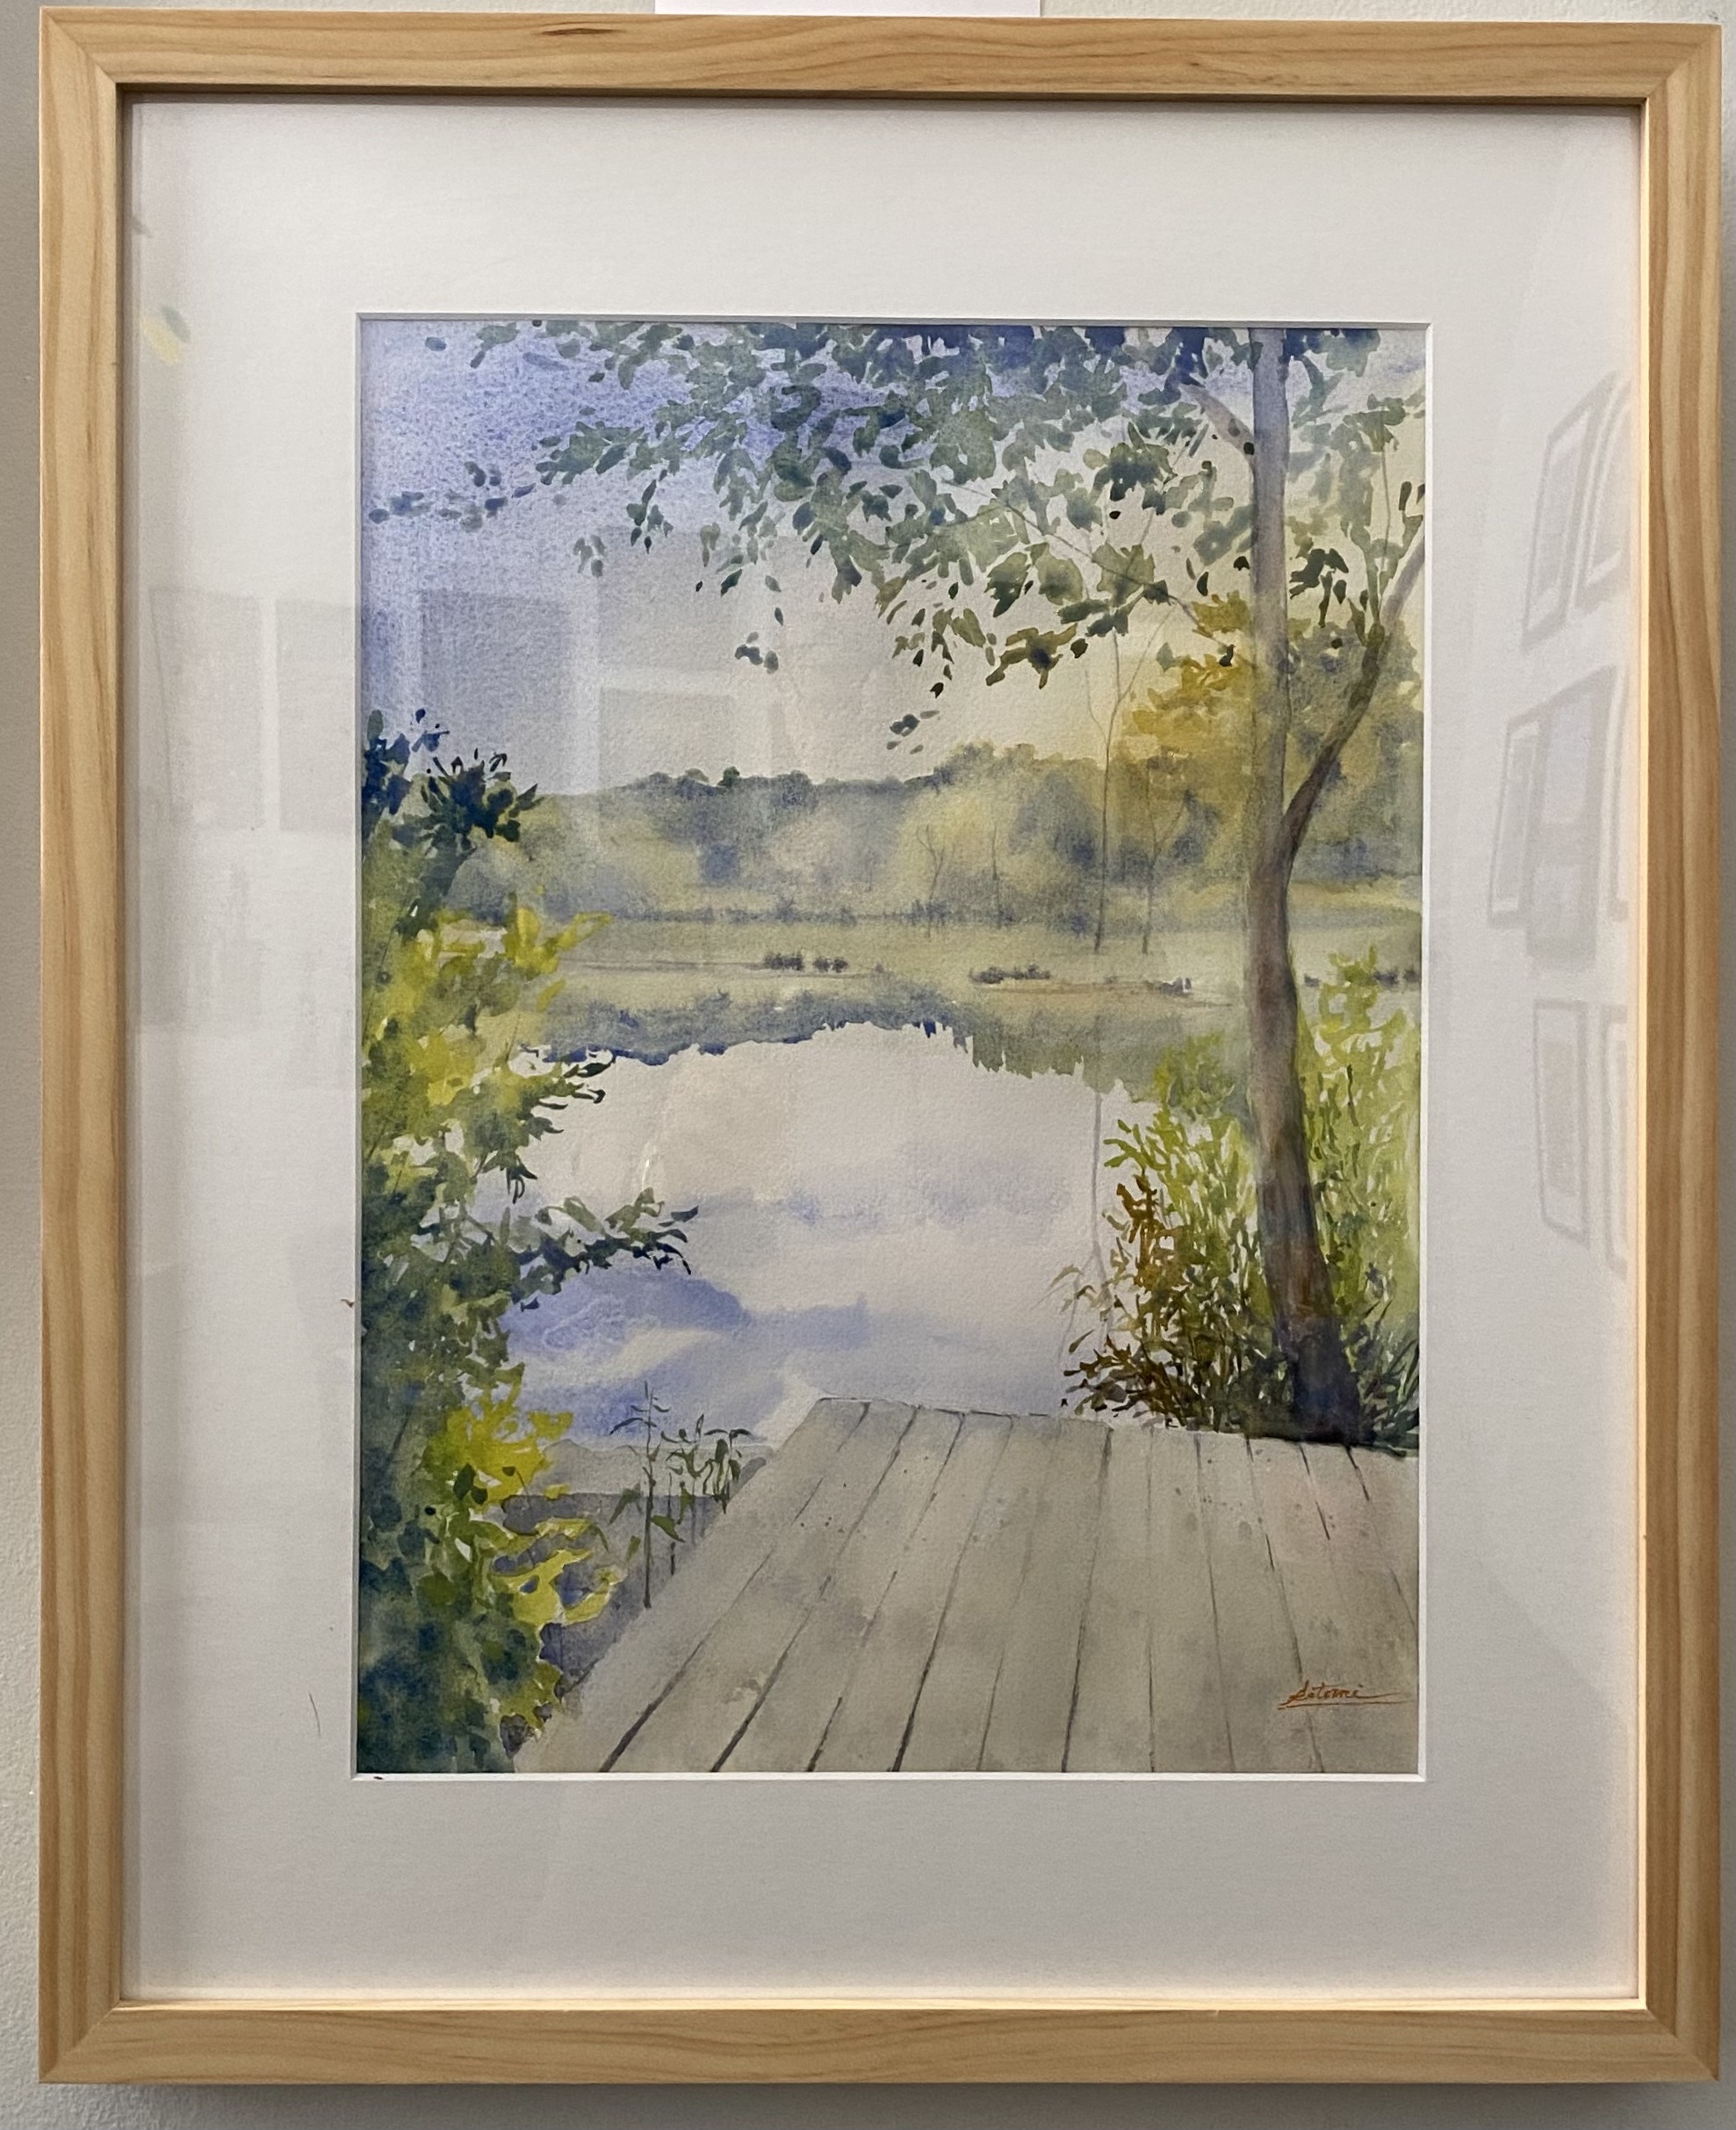 Pier at the Pond
Watercolor
11" X 15"
$355.